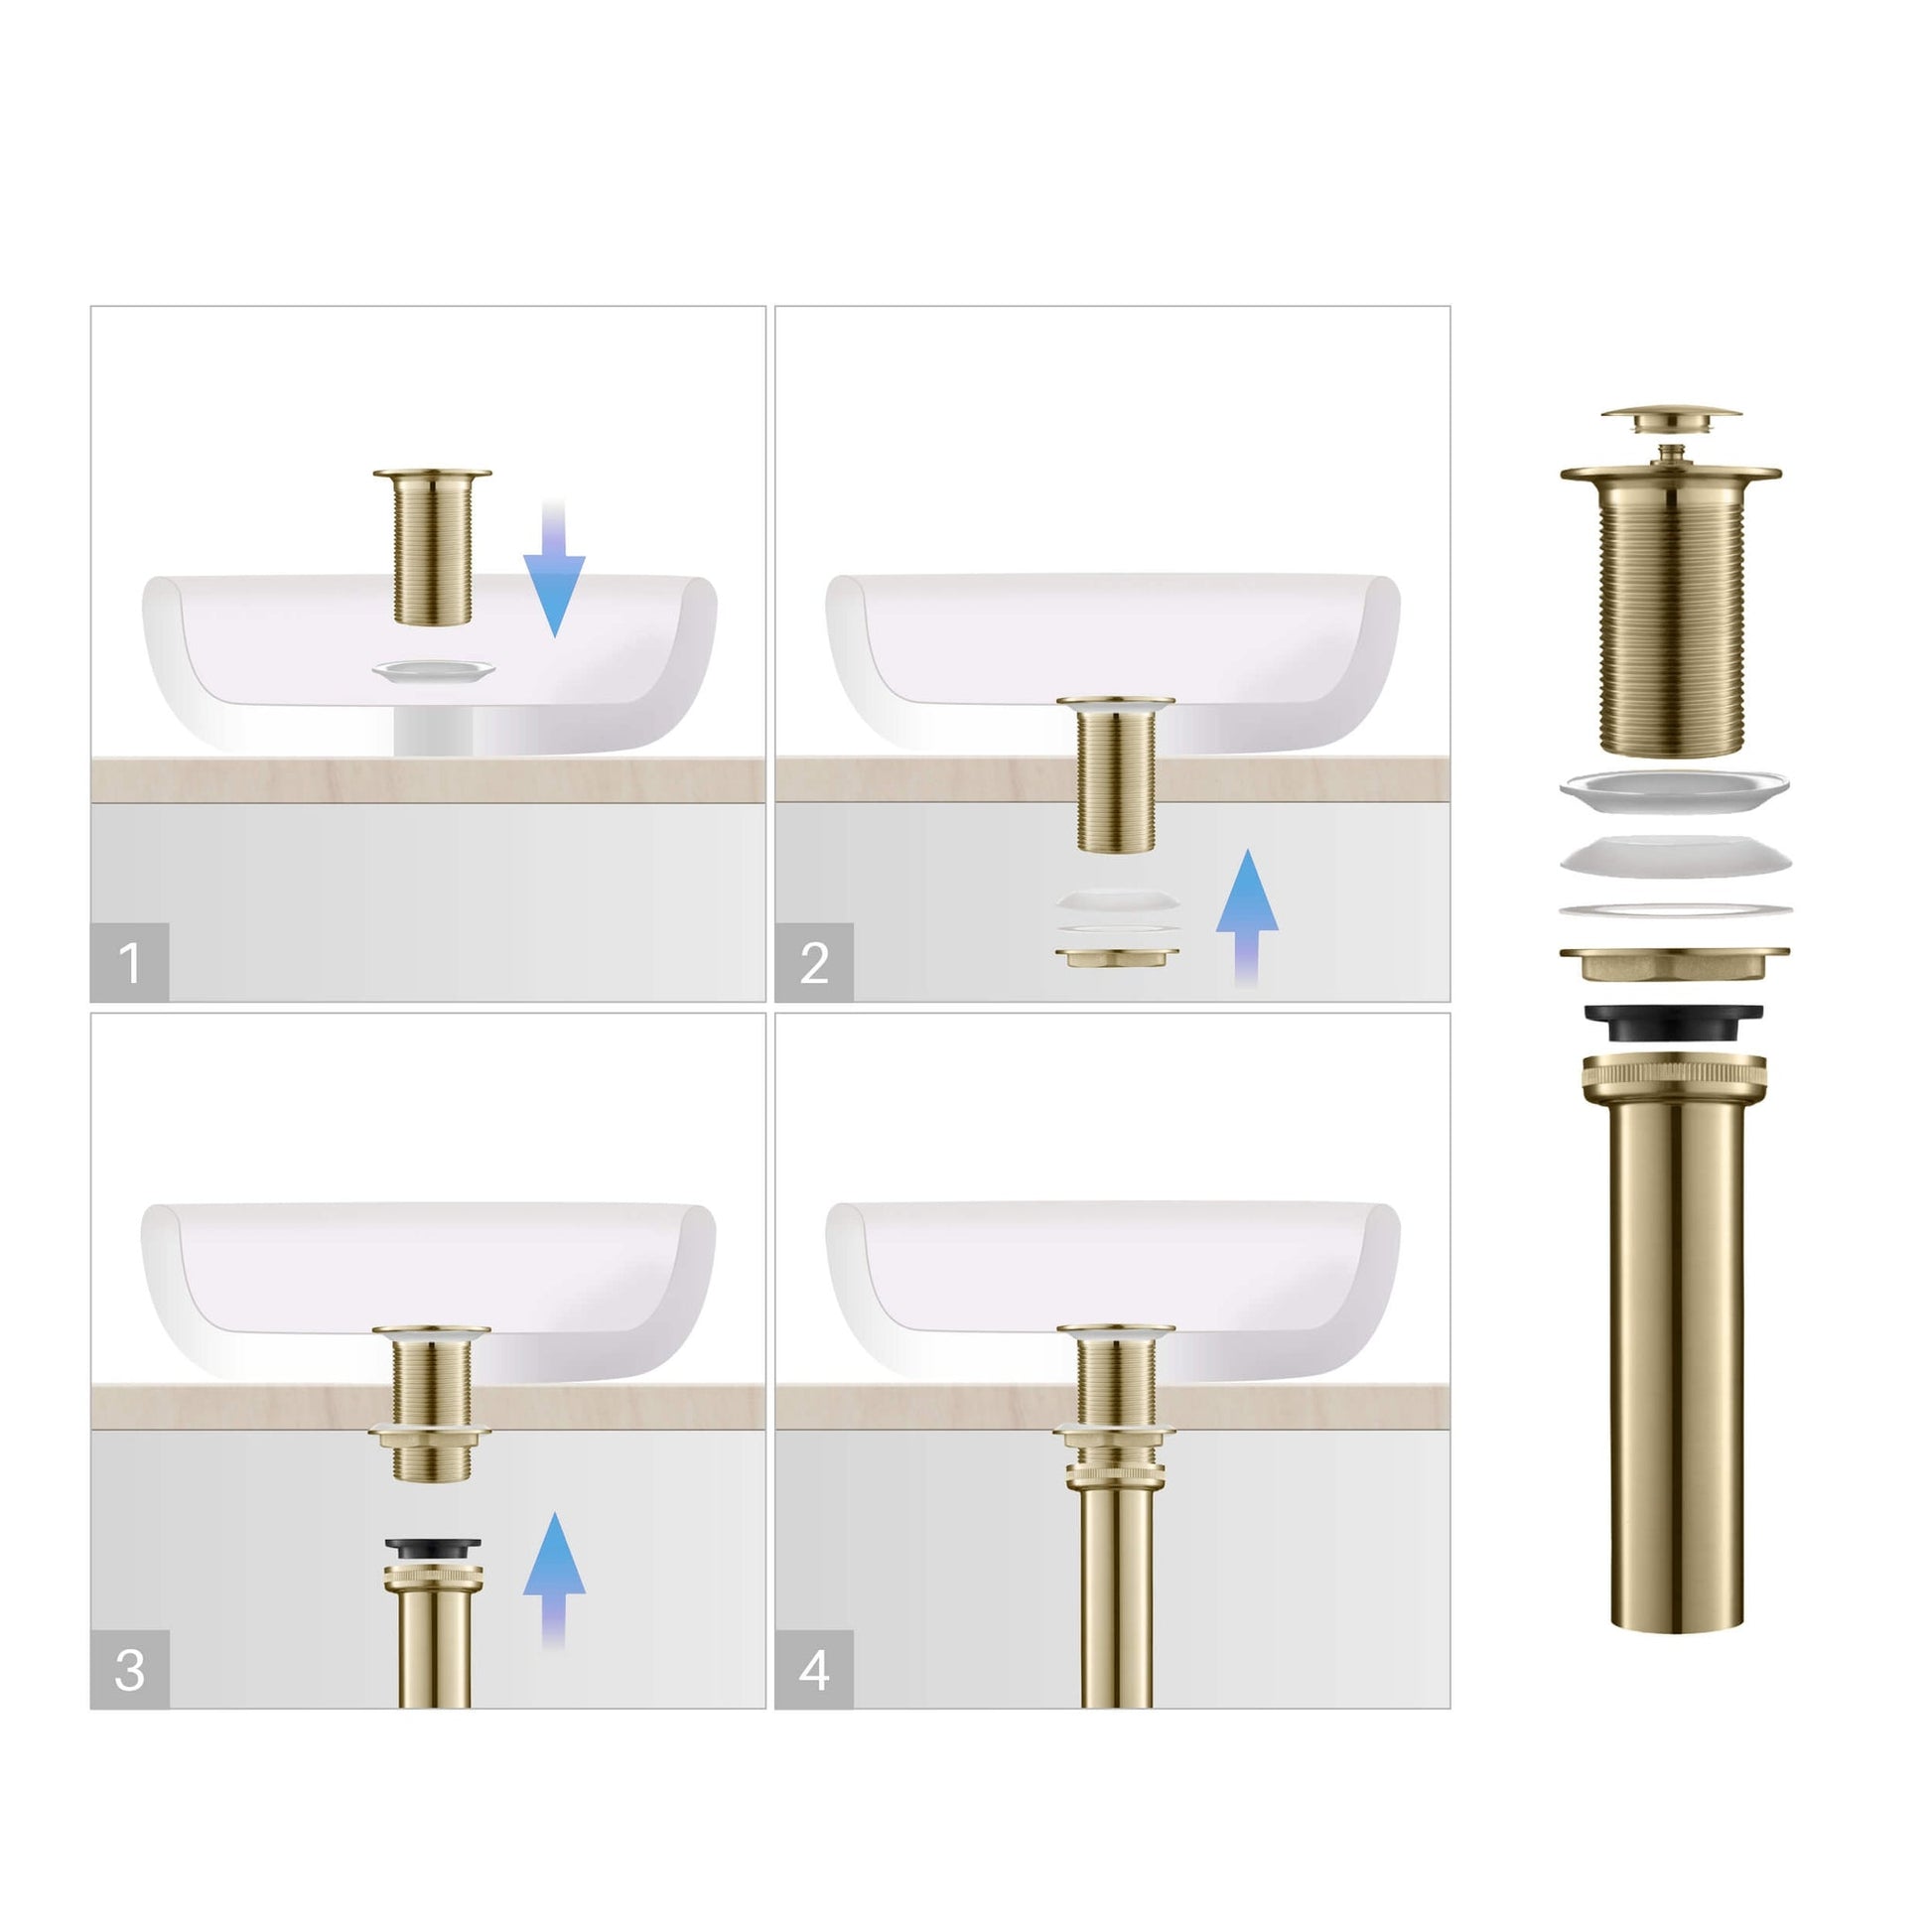 KIBI Brass Bathroom Vessel Sink Pop-Up Drain Stopper Small Cover Without Overflow in Brushed Gold Finish